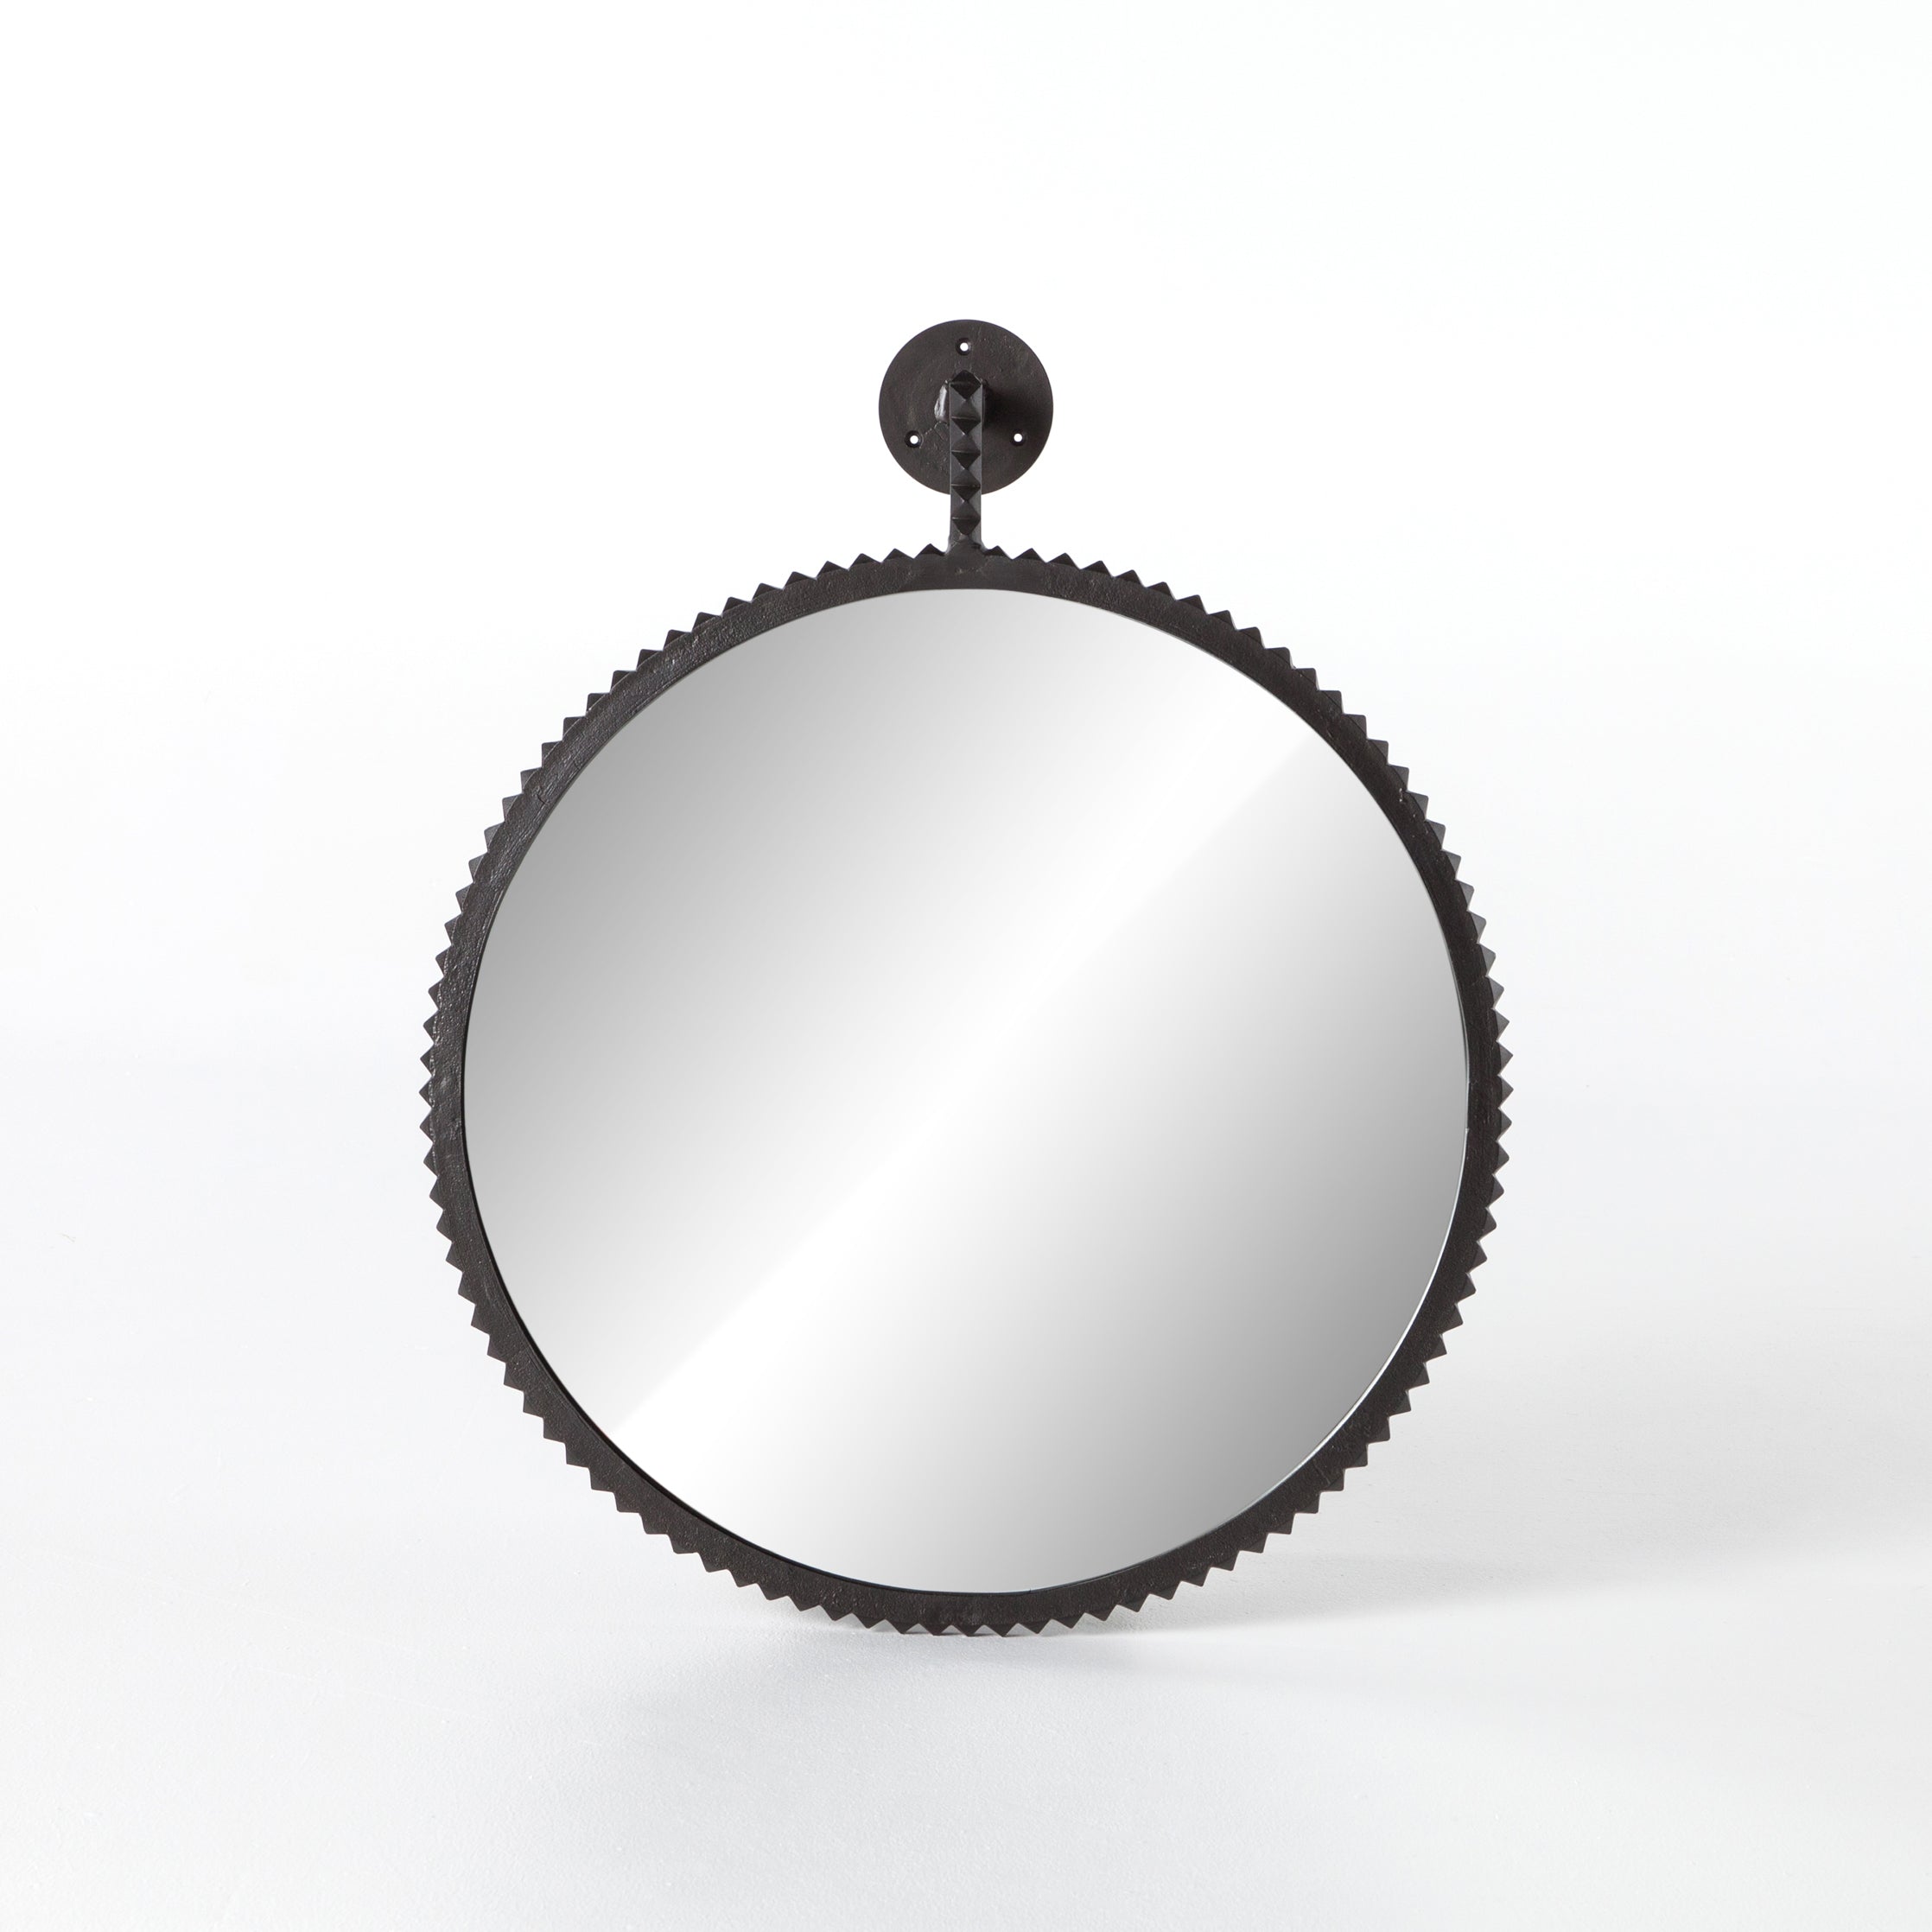 Finished in aged bronze, the formed edge of the Cru Large Mirror brings a unique look to this circle mirror. We'd love to see this hung in your bathroom or entryway to bring some extra character to the space.   Overall Dimensions: 31.00"w x 4.50"d x 37.50"h Colors: Aged Bronze, Mirror Materials: Aluminum, Glass